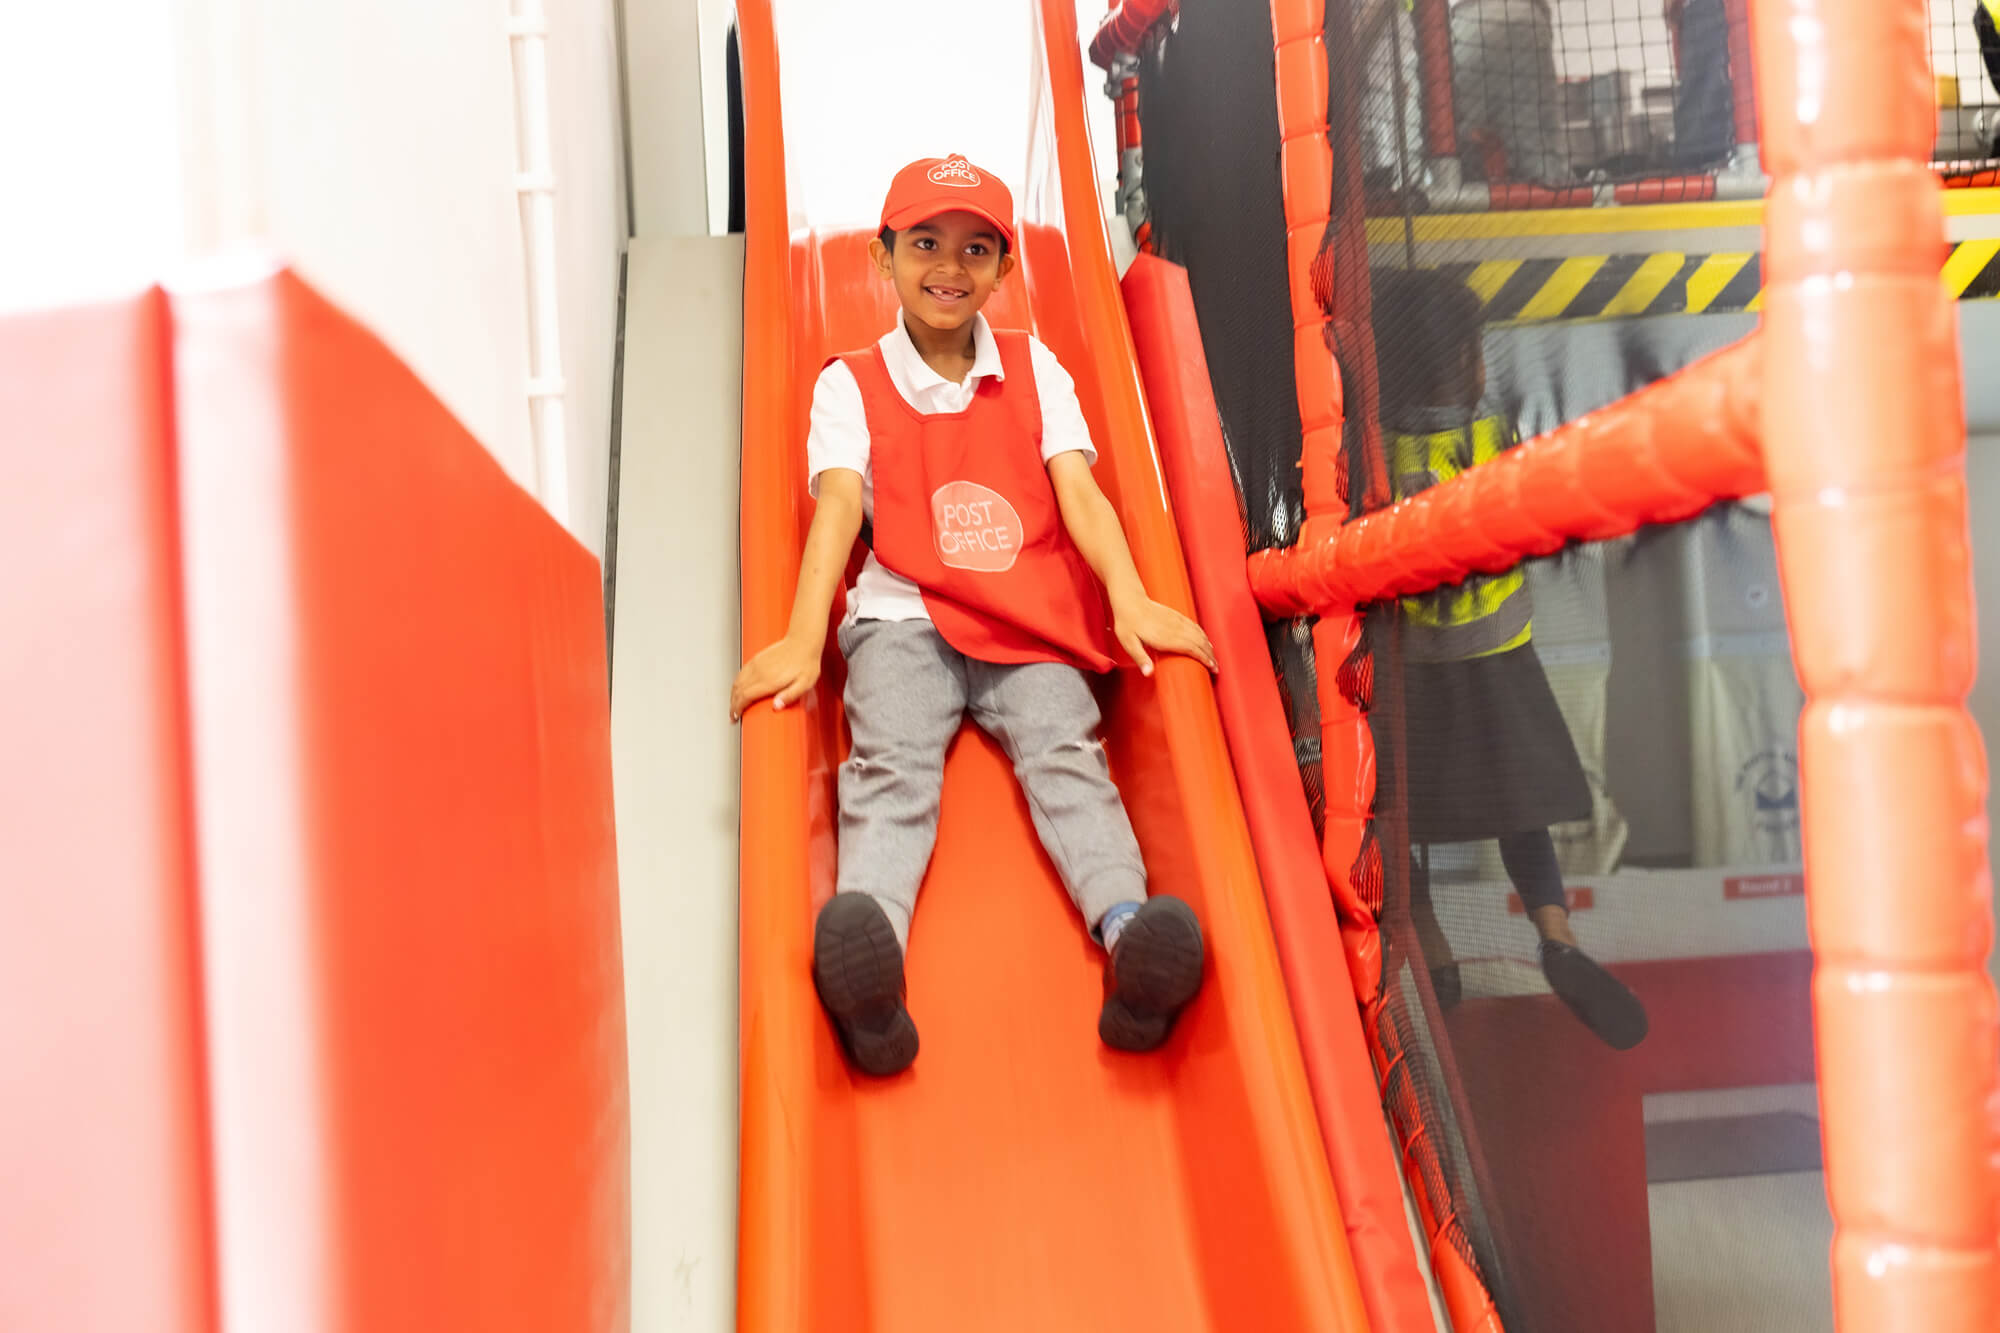 A young smiling boy slides down a bright red slide, legs first. He is wearing a red bib and red hat, grey trousers and a white polo shirt.